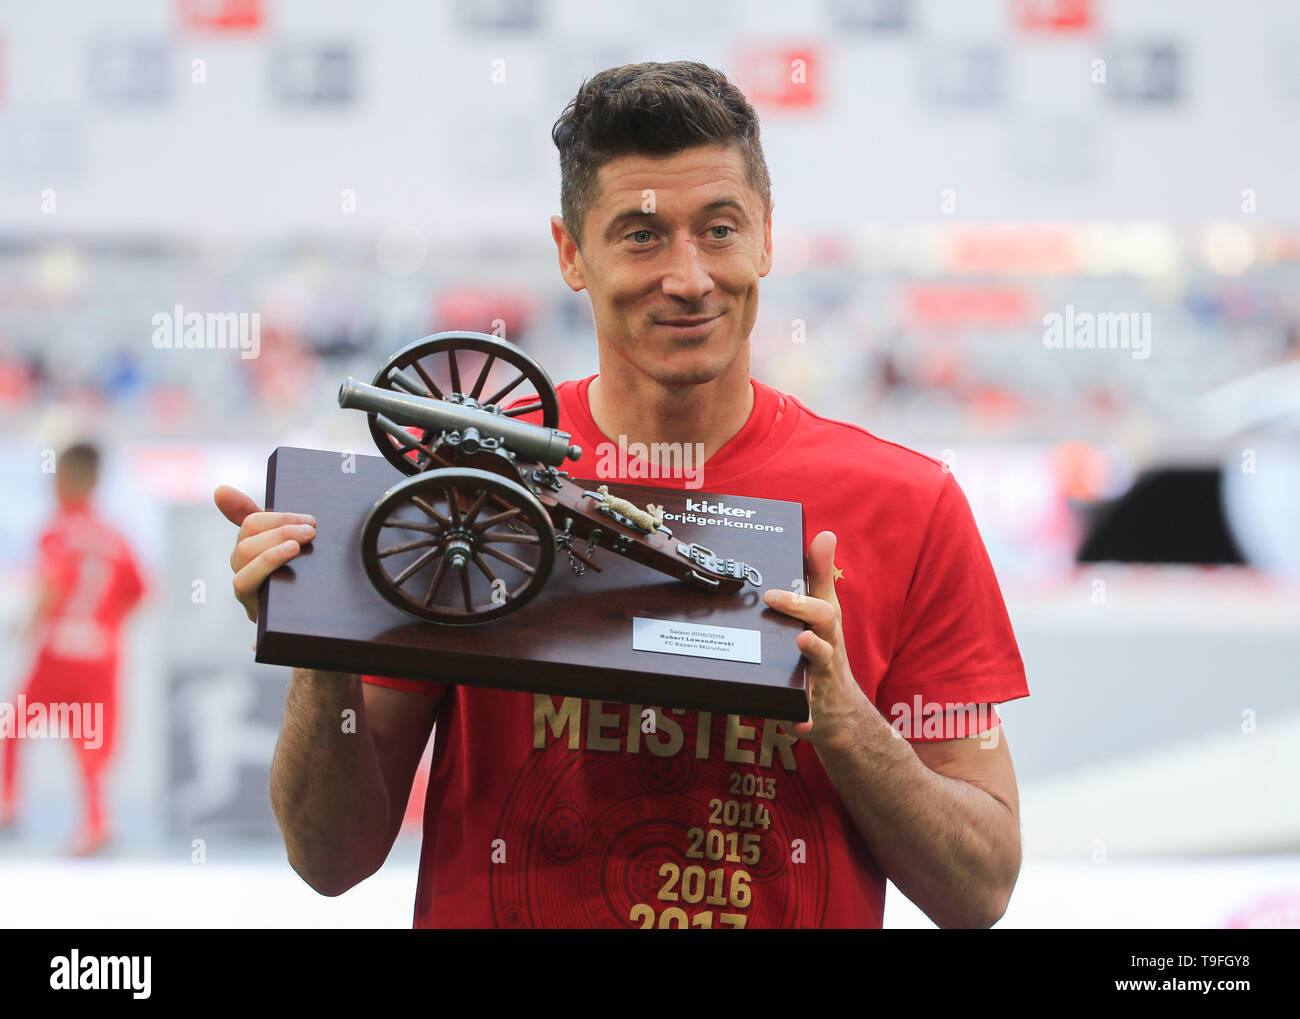 Munich, Germany. 18th May, 2019. Bayern Munich's Robert Lewandowski poses with the trophy for the top goal scorer during the awarding ceremony after a German Bundesliga match between FC Bayern Munich and Eintracht Frankfurt in Munich, Germany, on May 18, 2019. Bayern Munich won 5-1 and claimed the 7th successive Bundesliga title. Credit: Philippe Ruiz/Xinhua/Alamy Live News Stock Photo